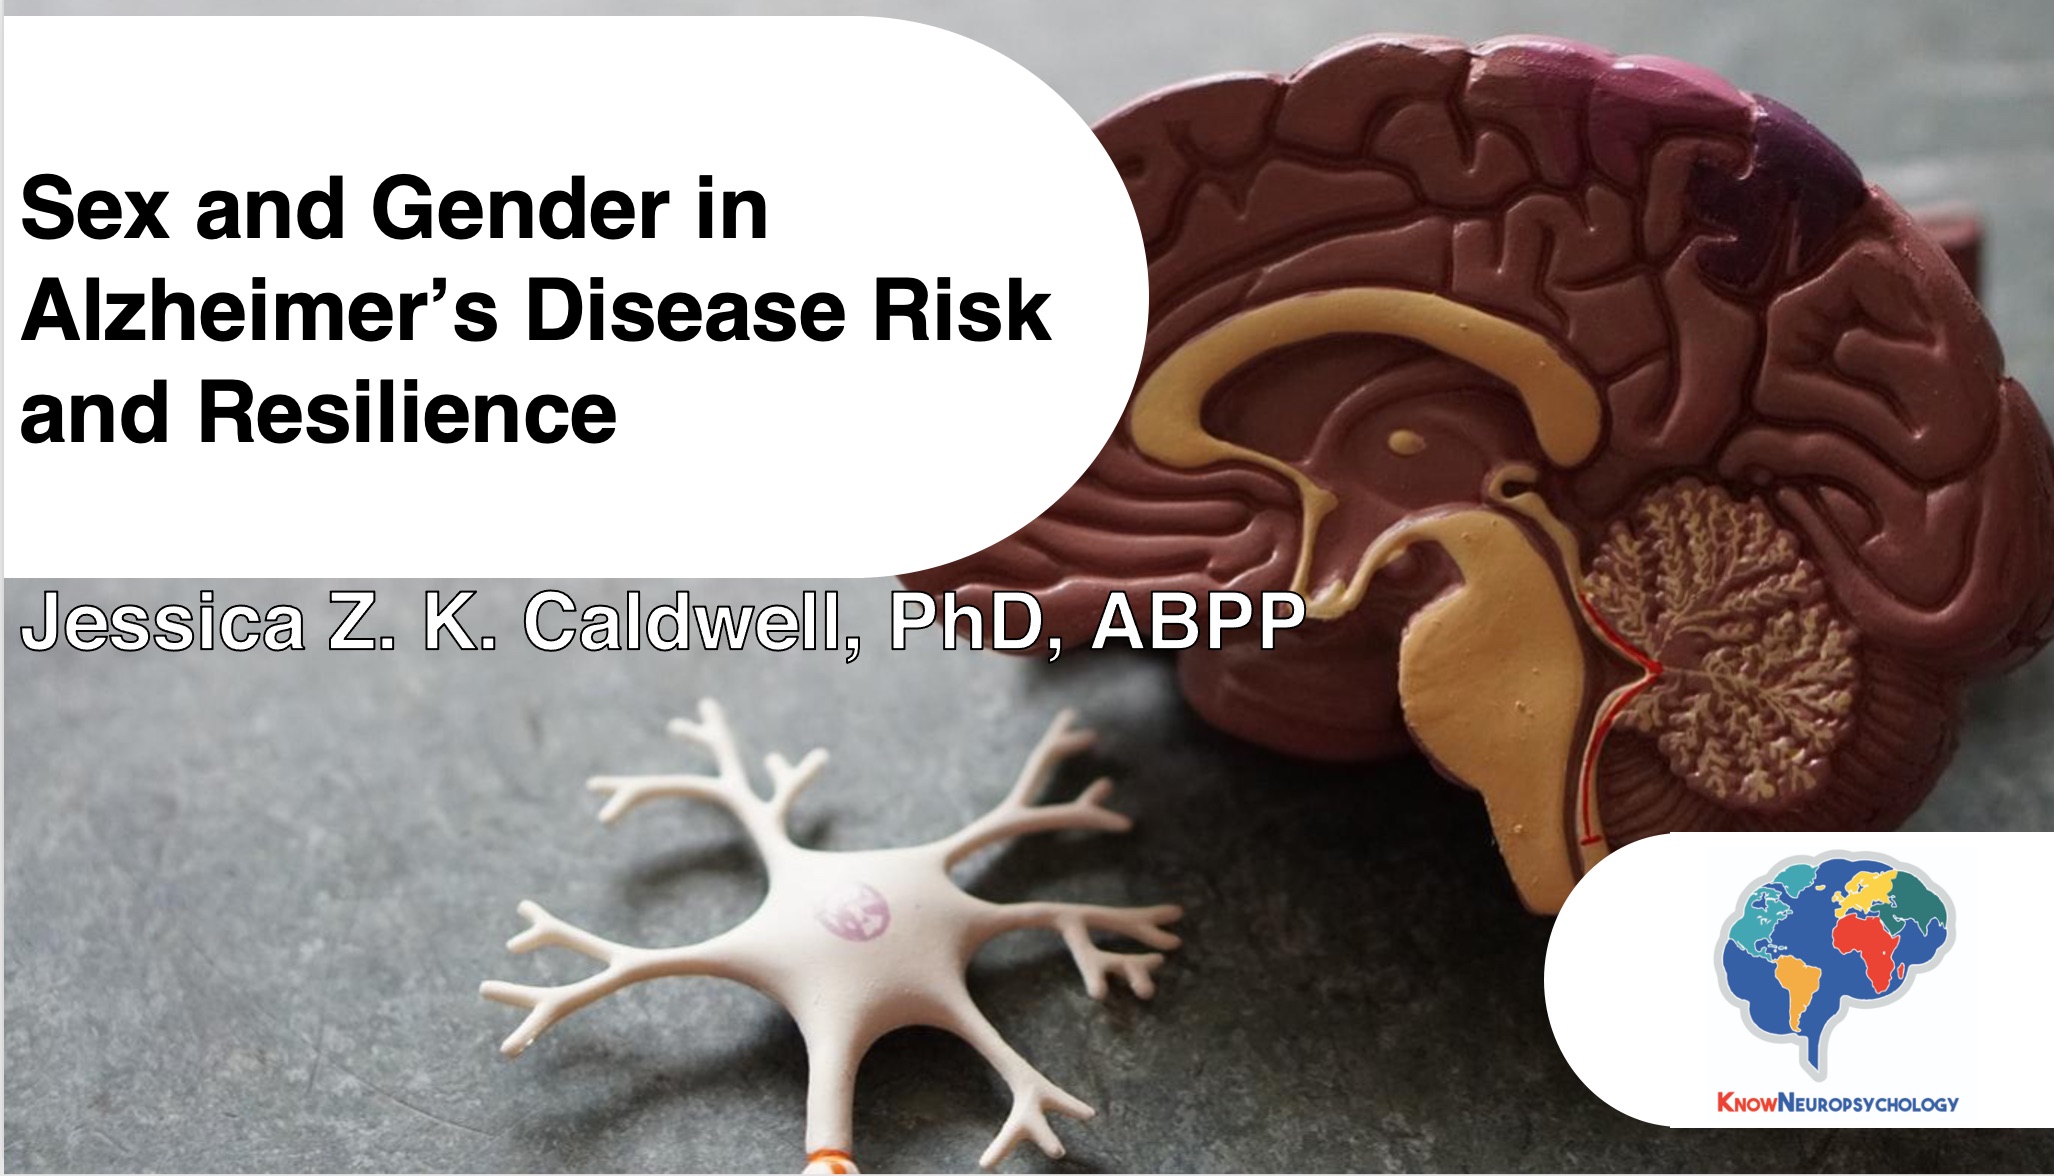 Sex and Gender in Alzheimer’s Disease Risk and Resilience with Dr. Jessica Caldwell